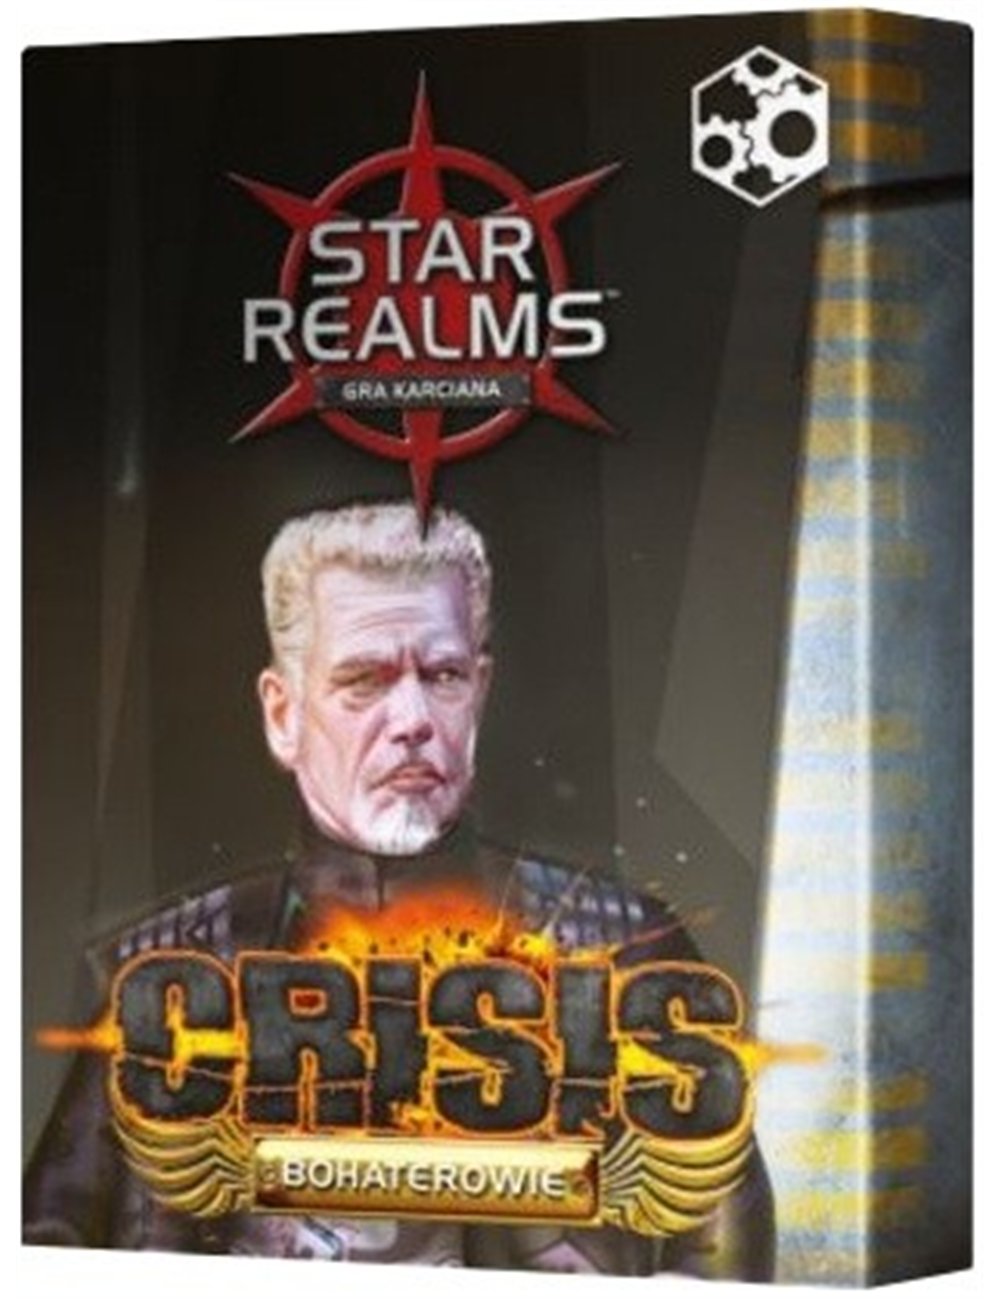 Star Realms - Crisis - Bohaterowie